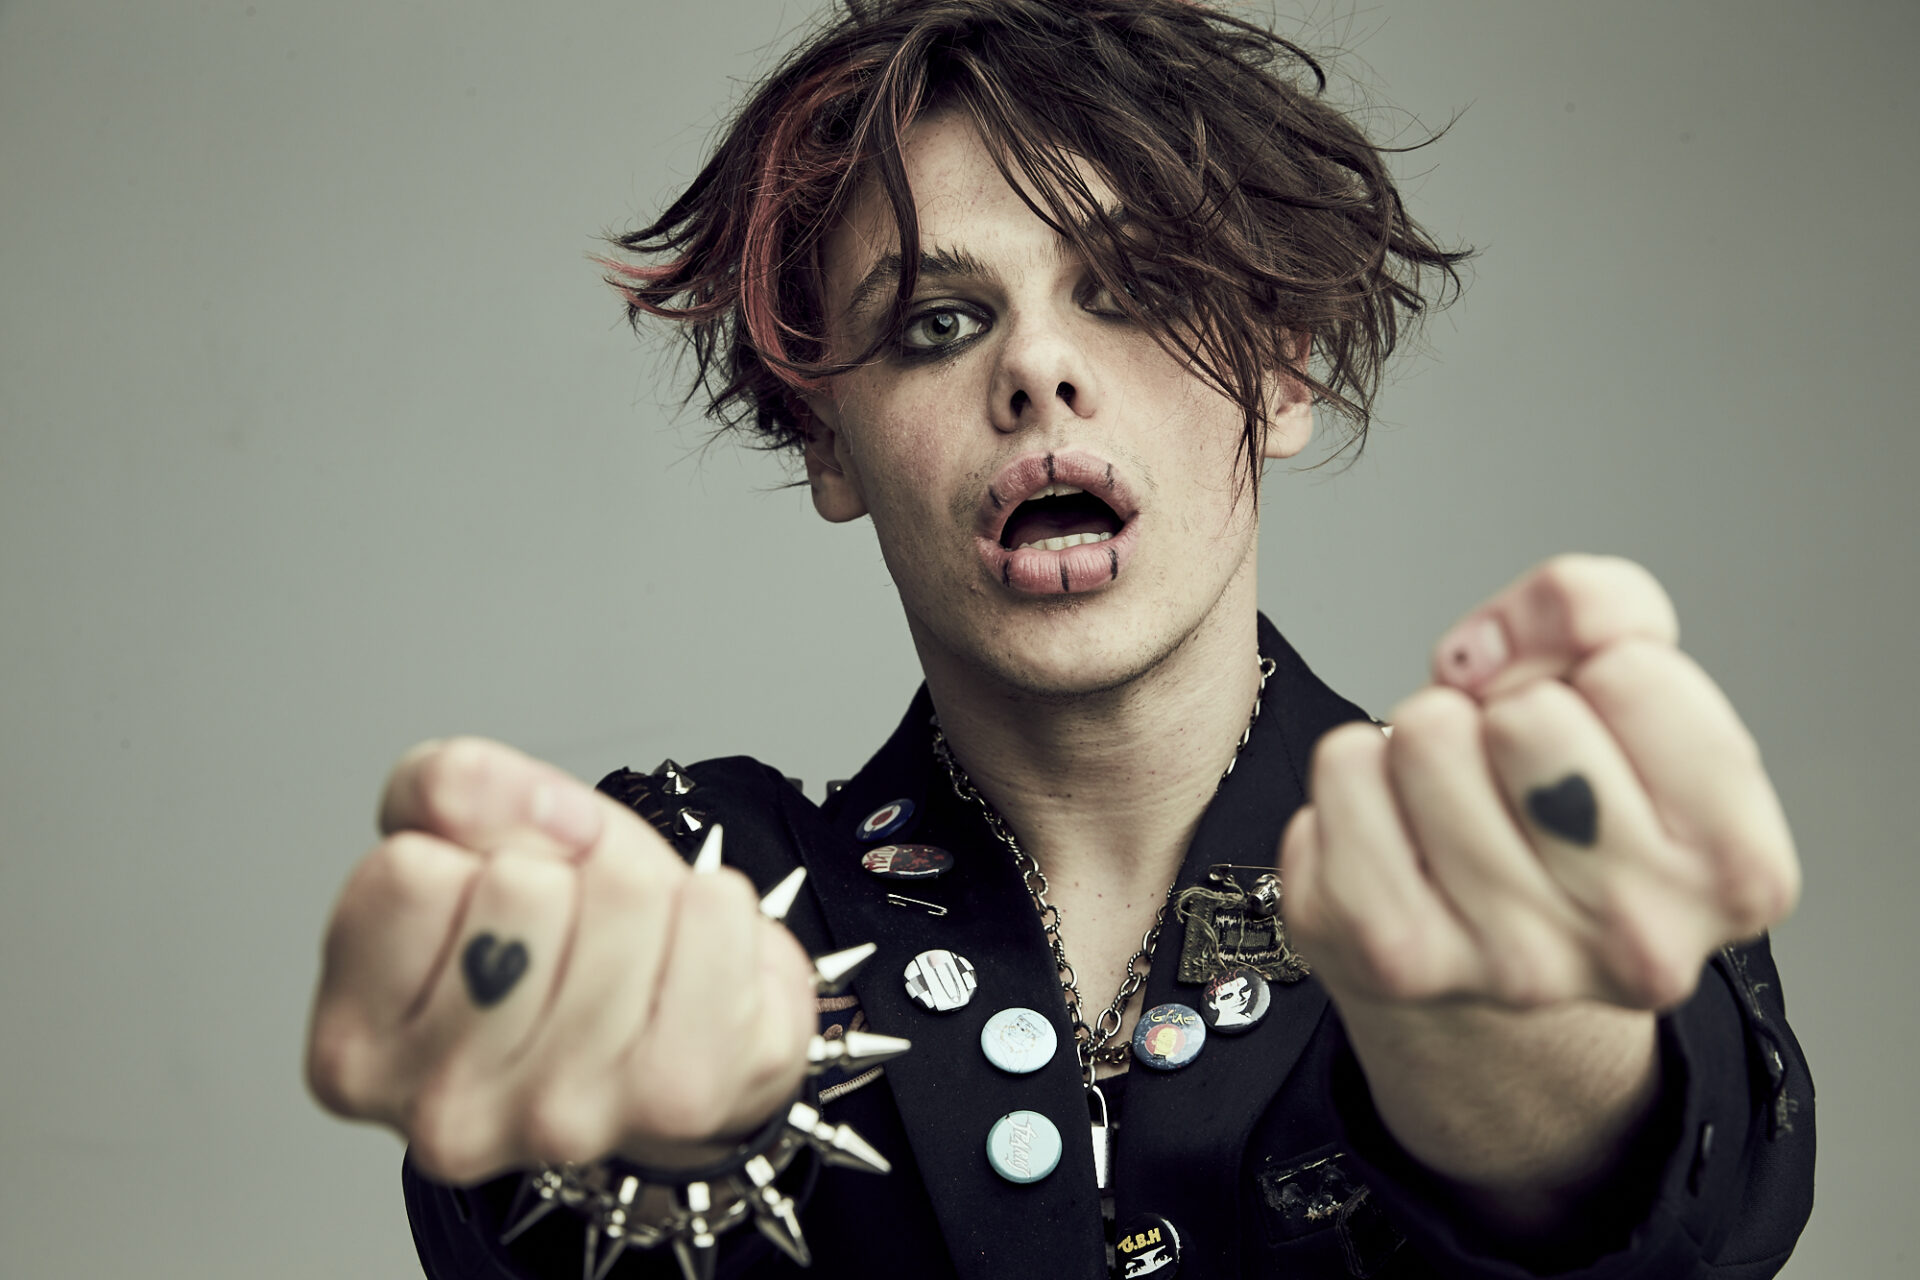 INTERVIEW: Yungblud discusses new EP, connecting to fans and more